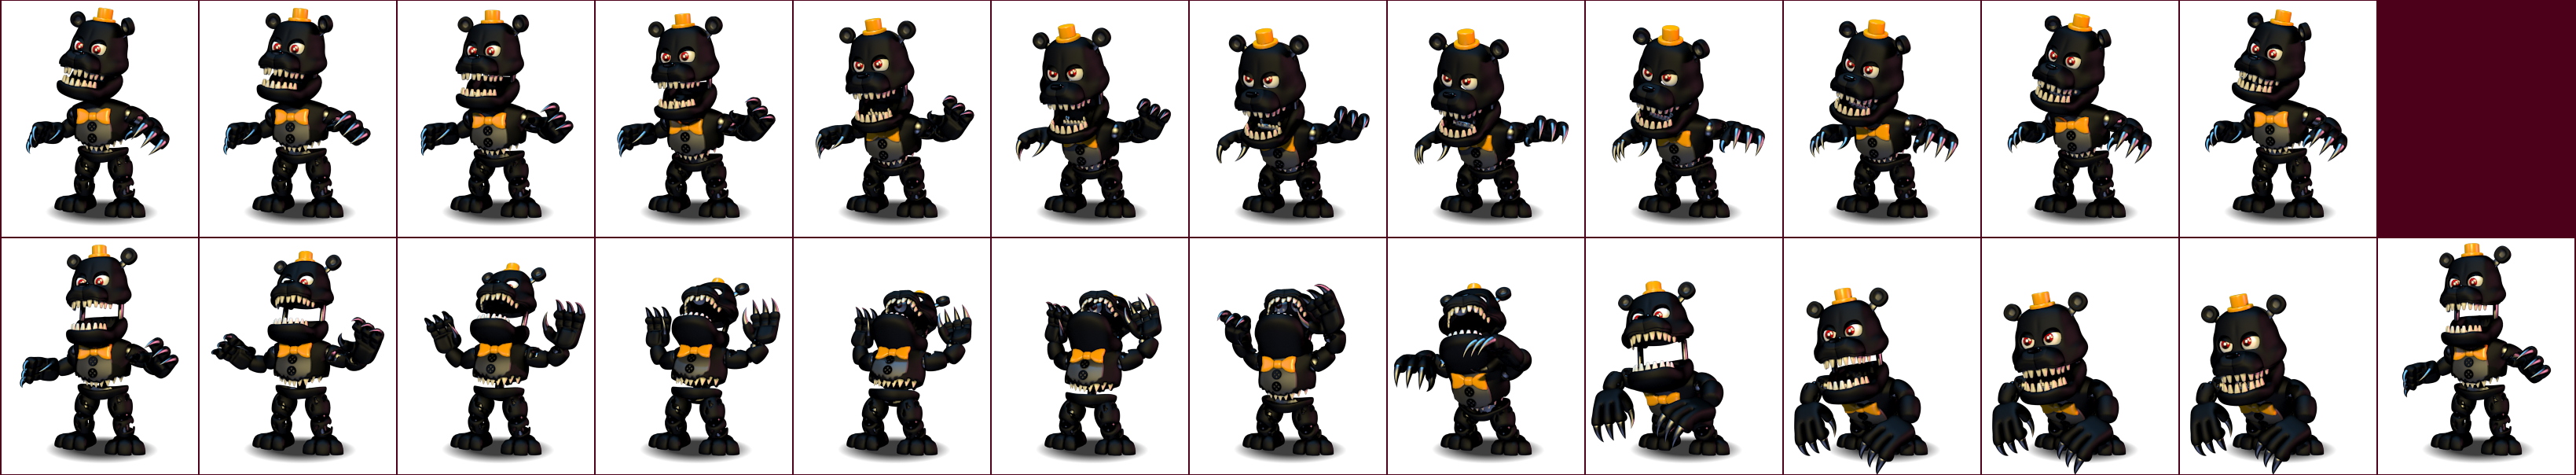 FNAF WORLD THE RETURN TO NIGHTMARE'S FULL VERSION (fan-game) 